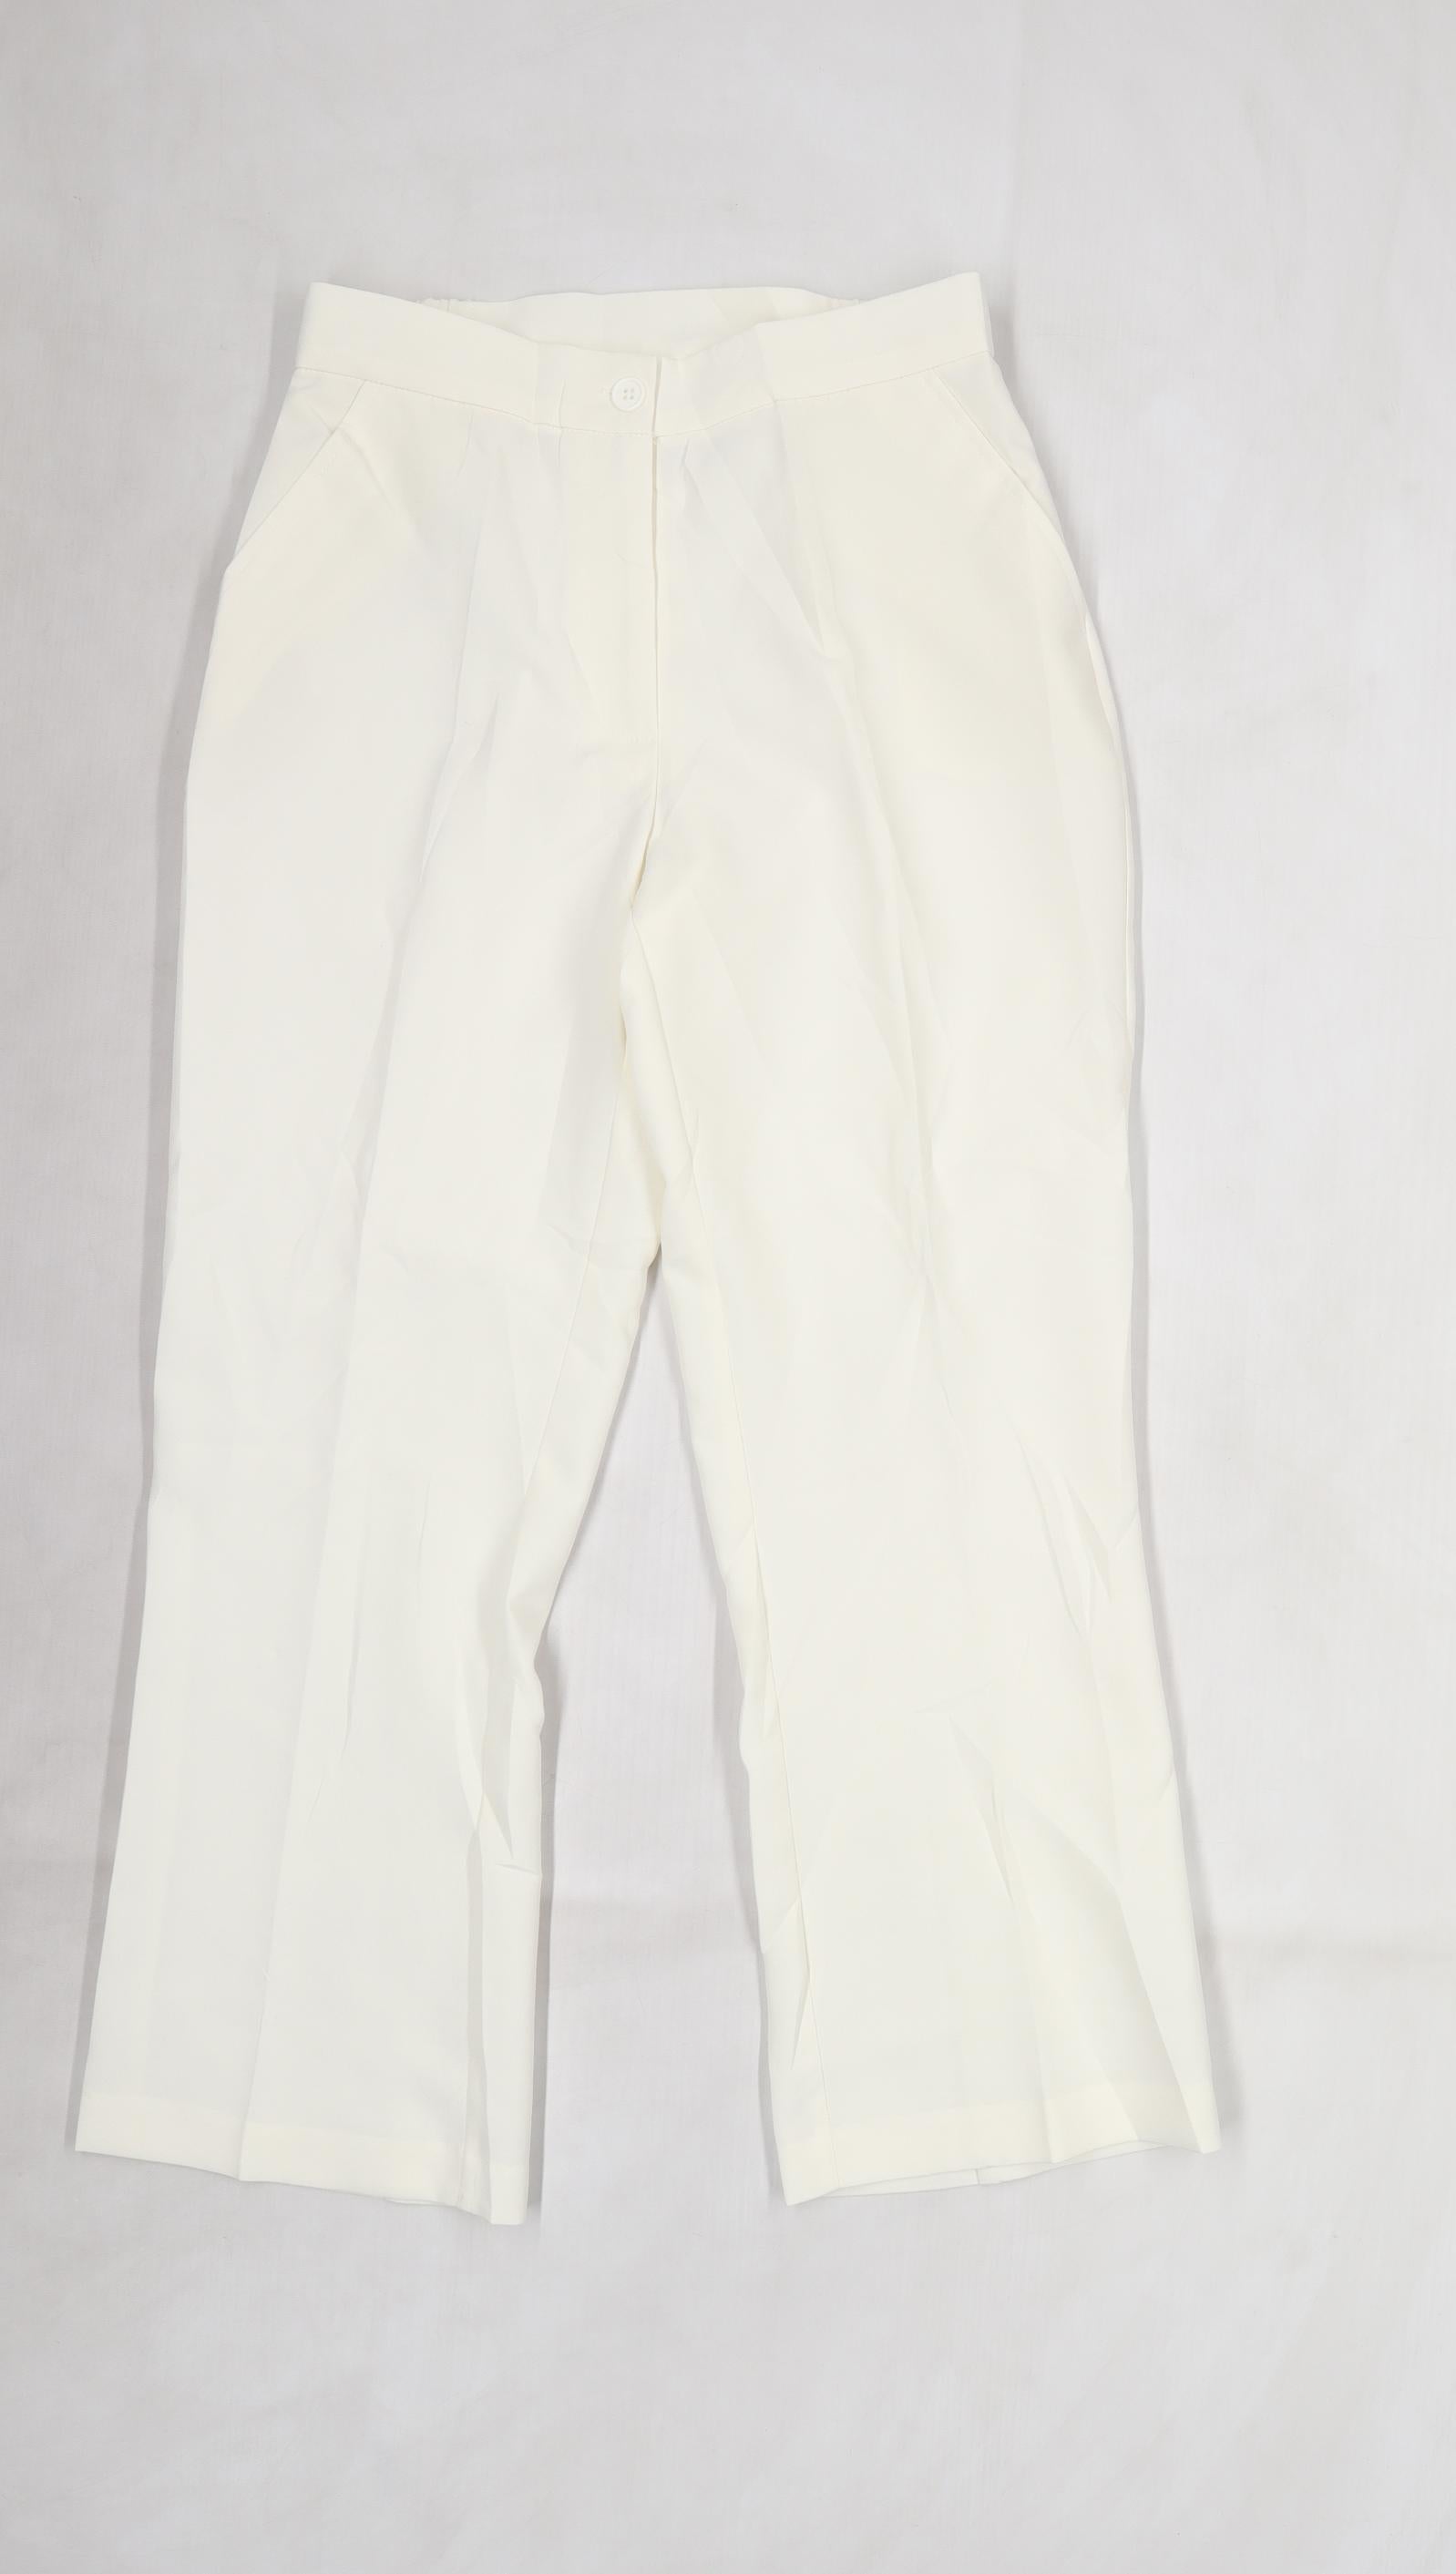 Cotton Stretch Trousers - Trousers - Damart.co.uk